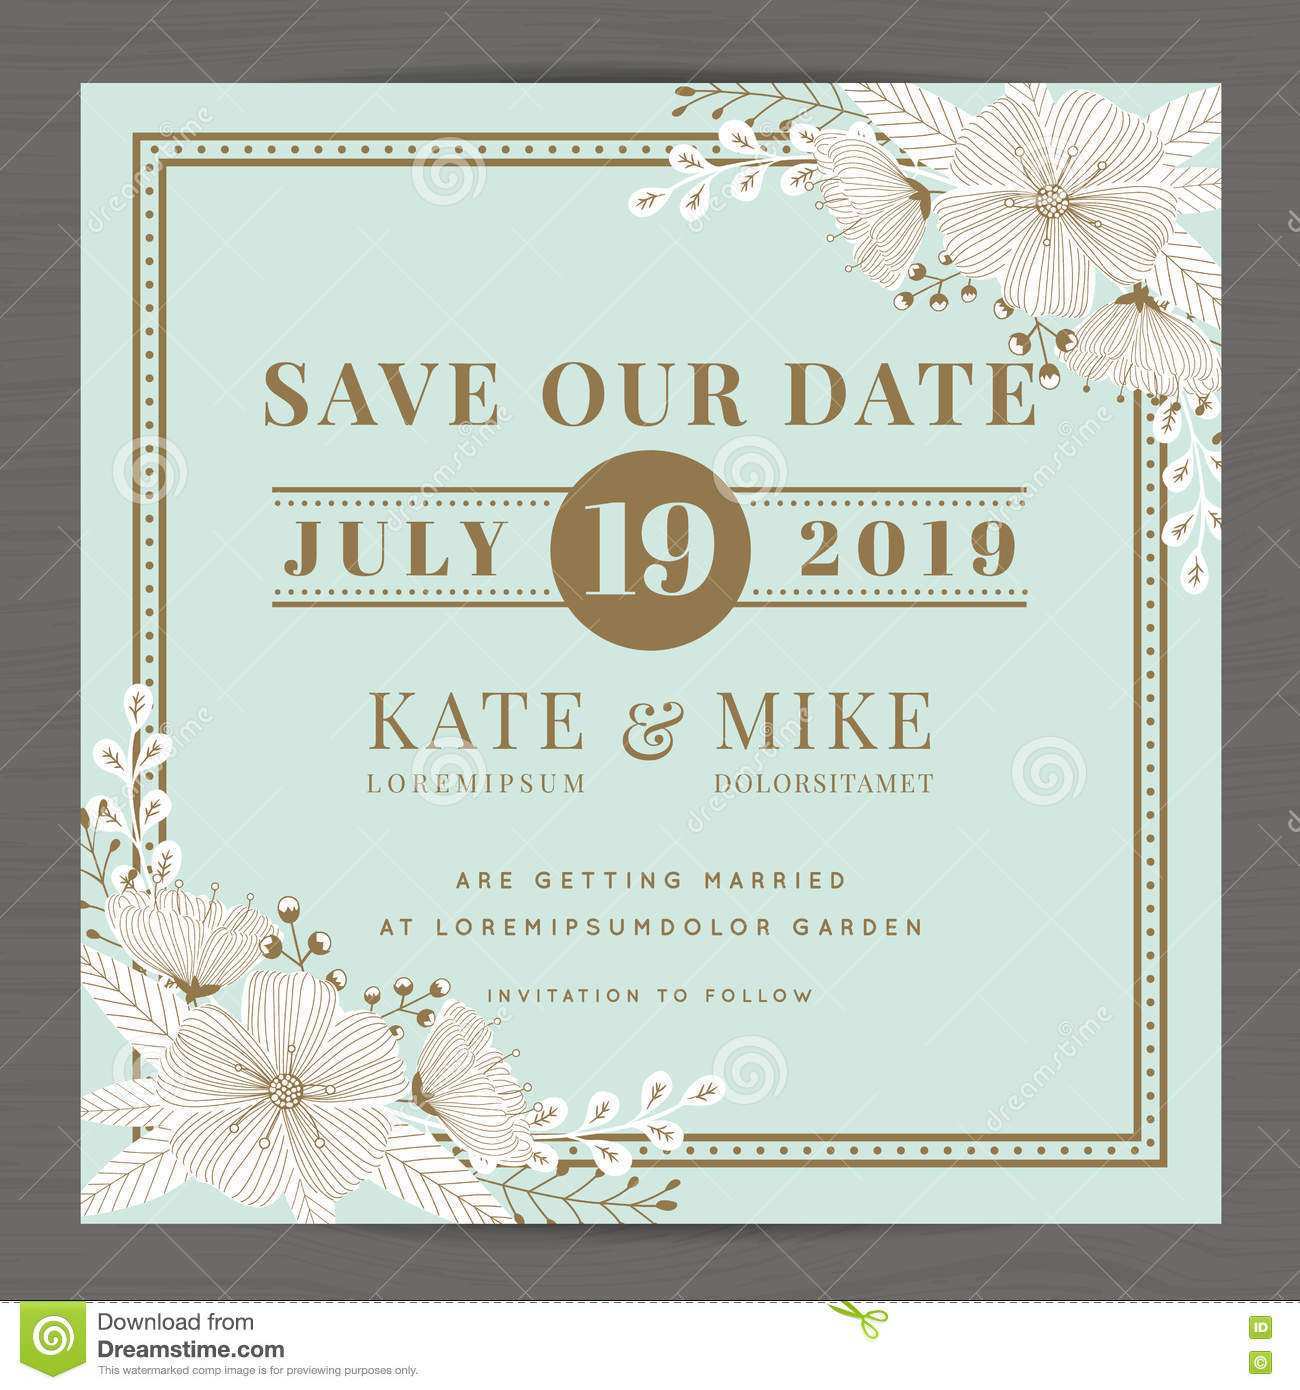 23 Free Printable Invitation Card Format Save The Date Maker with Invitation Card Format Save The Date